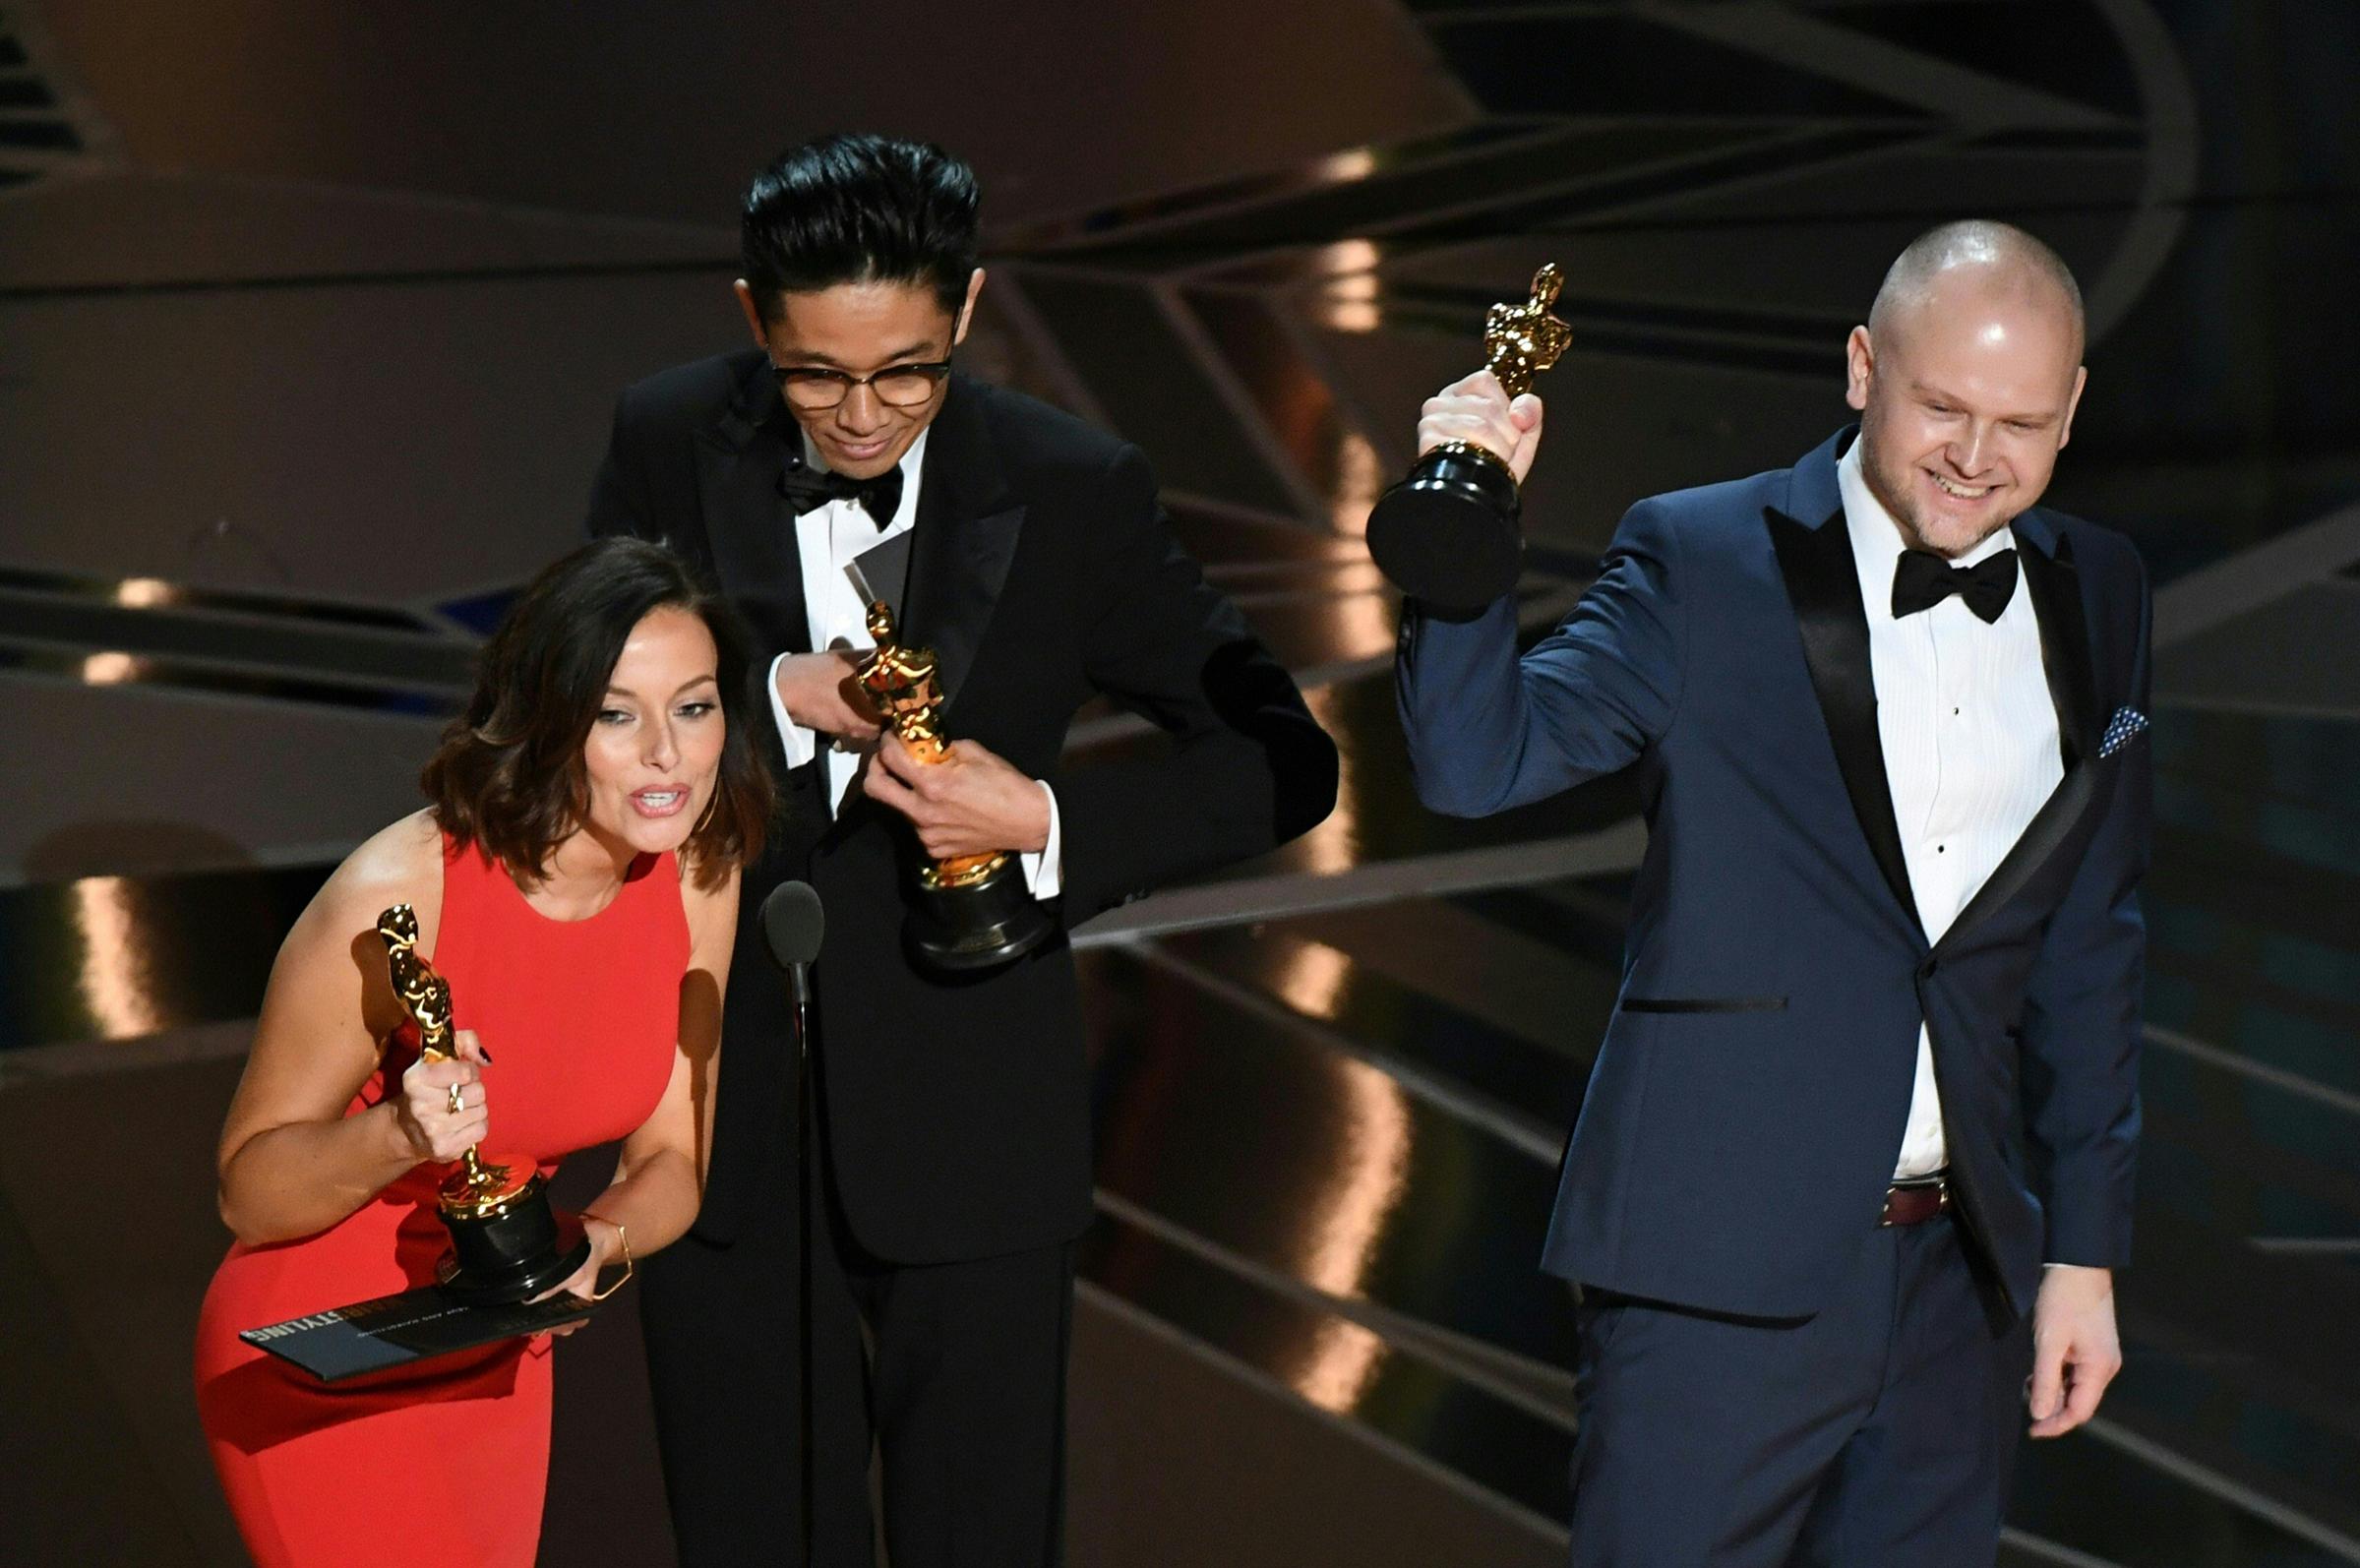 Make-Up and Hairstyling artists Lucy Sibbick, Kazuhiro Tsuji and David Malinowski accept the Oscar for Best Makeup and Hairstyling in Darkest Hour during the 90th Annual Academy Awards show on March 4, 2018 in Hollywood.